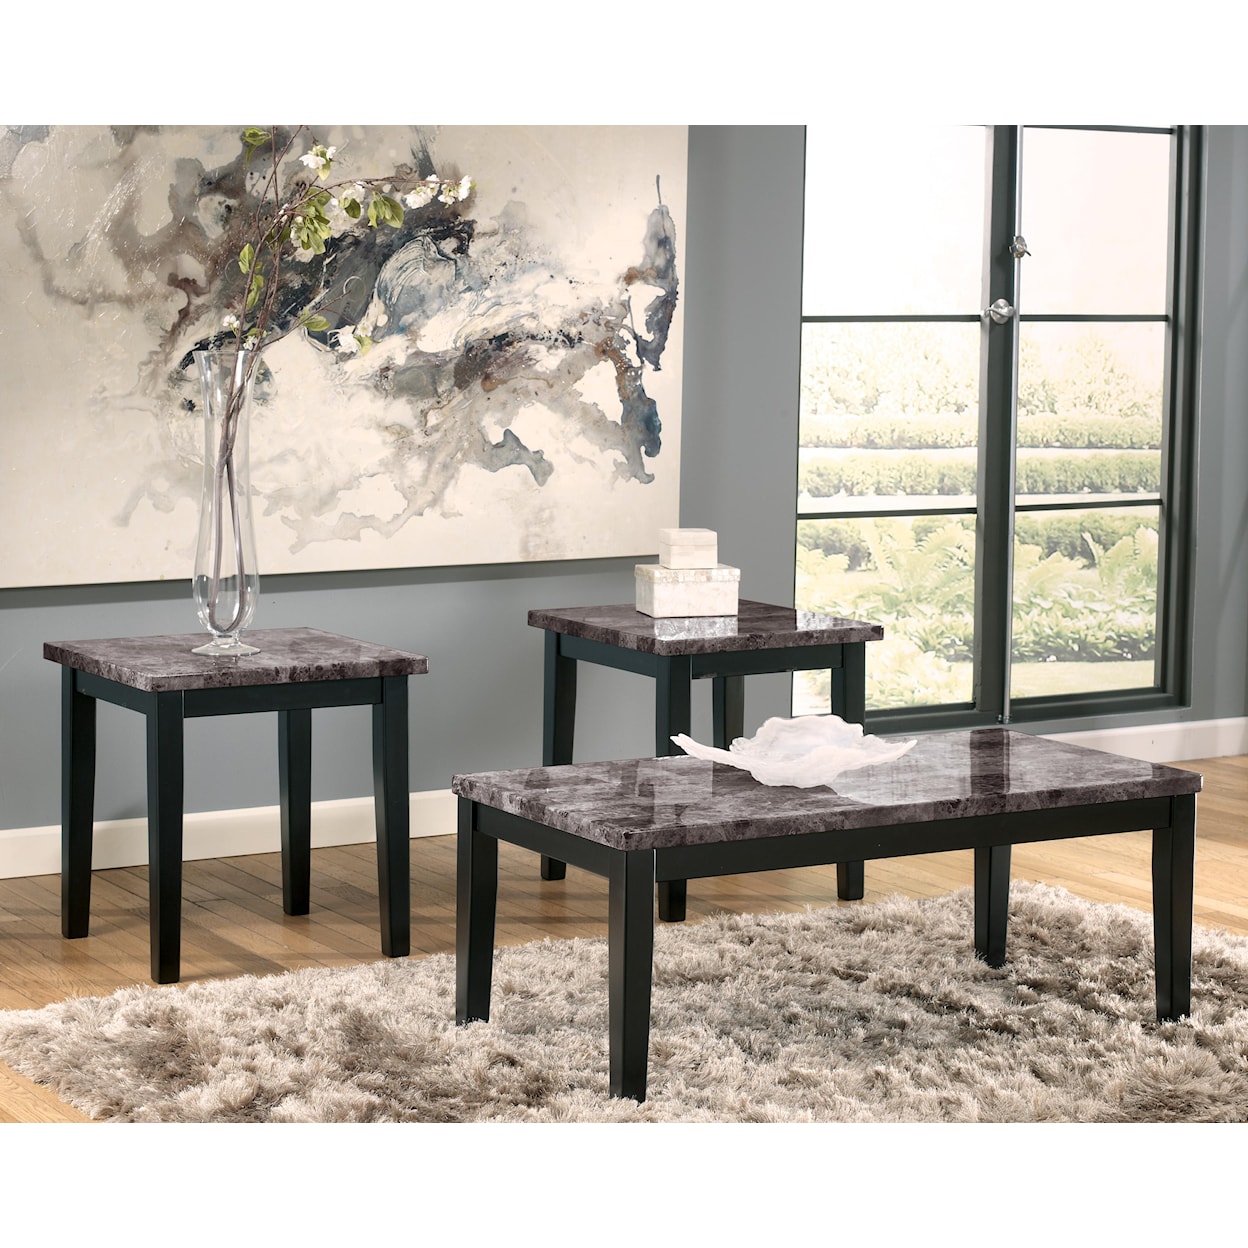 Signature Design by Ashley Maysville Occasional Table Set 